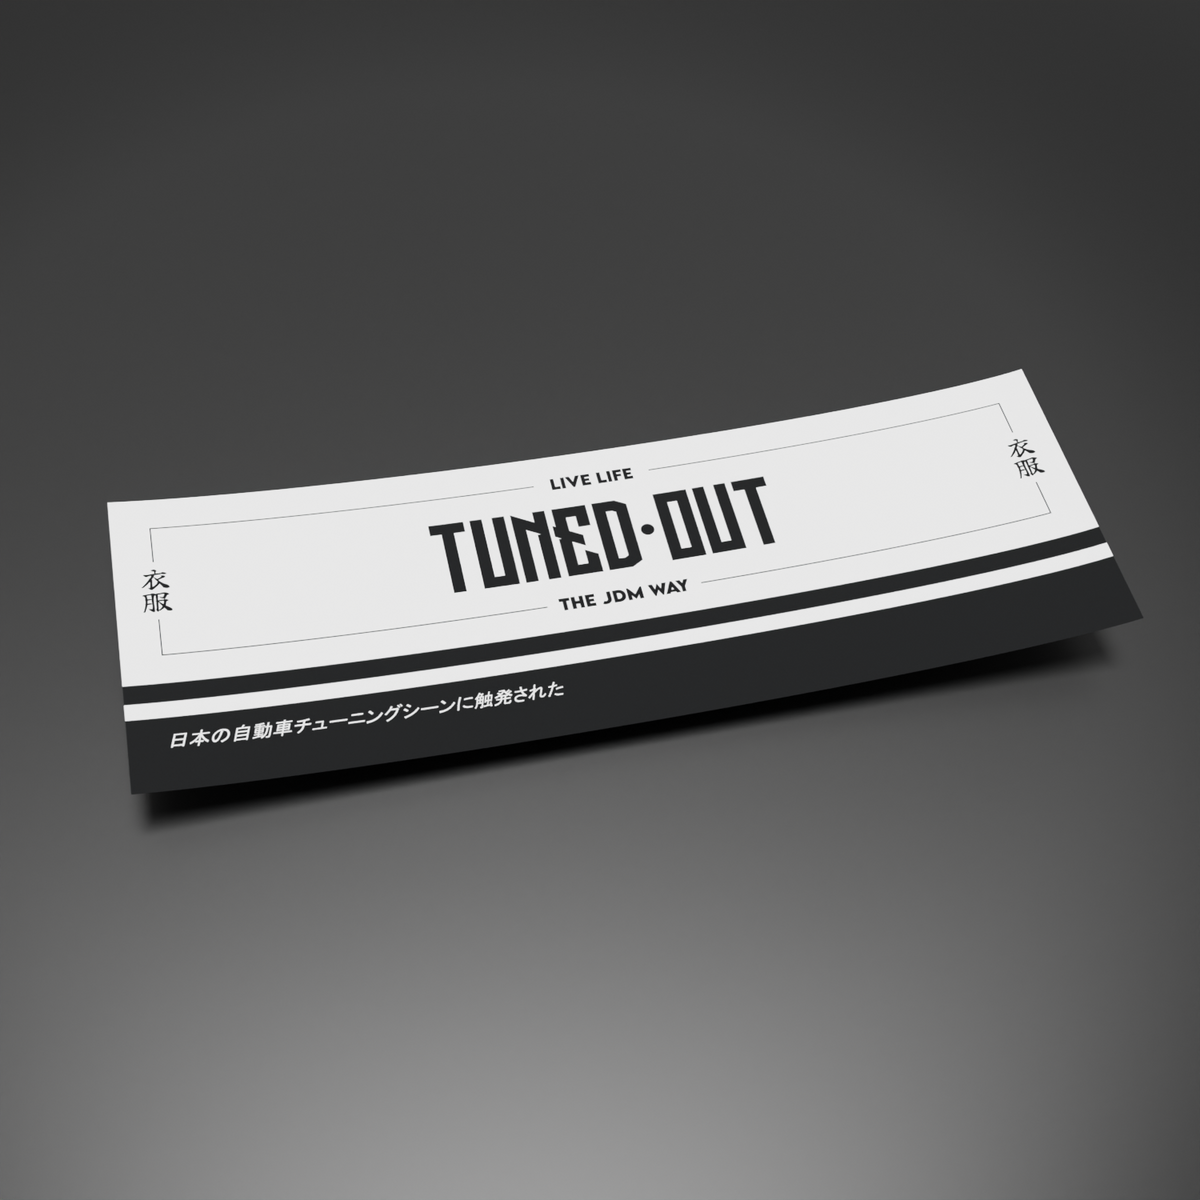 Tuned-Out Initial Slapsticker